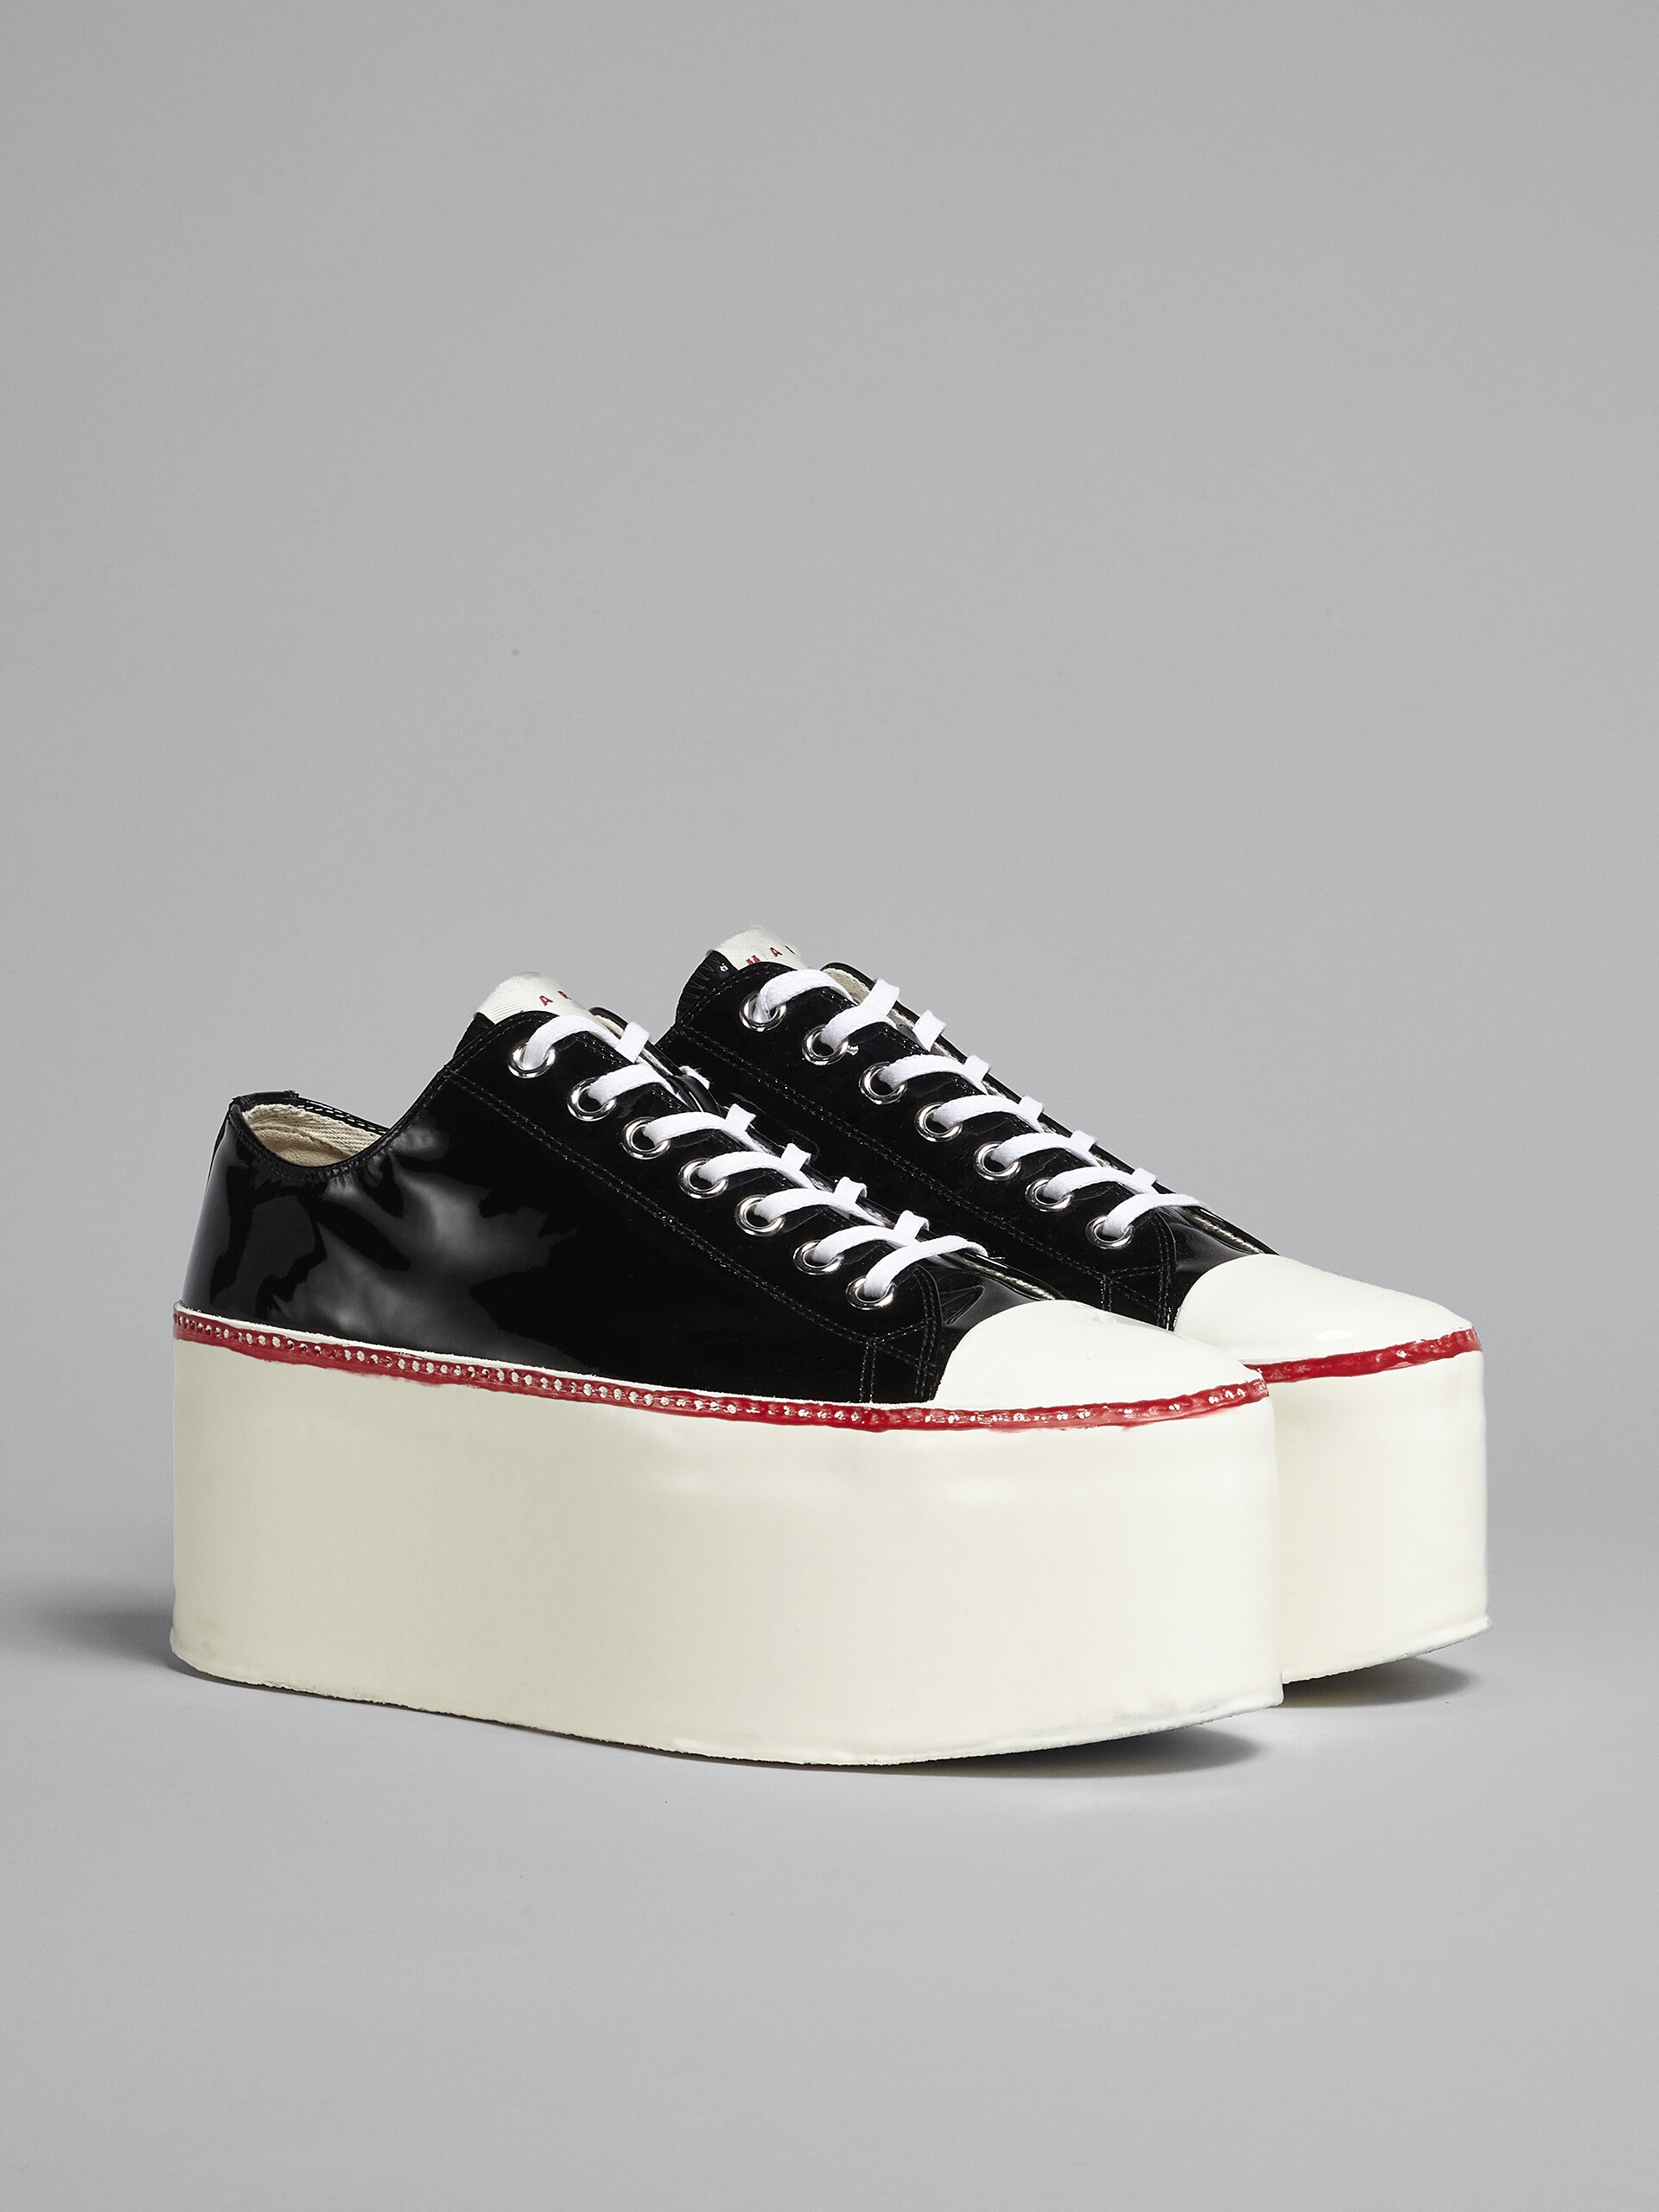 Patent leather platform sneaker - Sneakers - Image 2